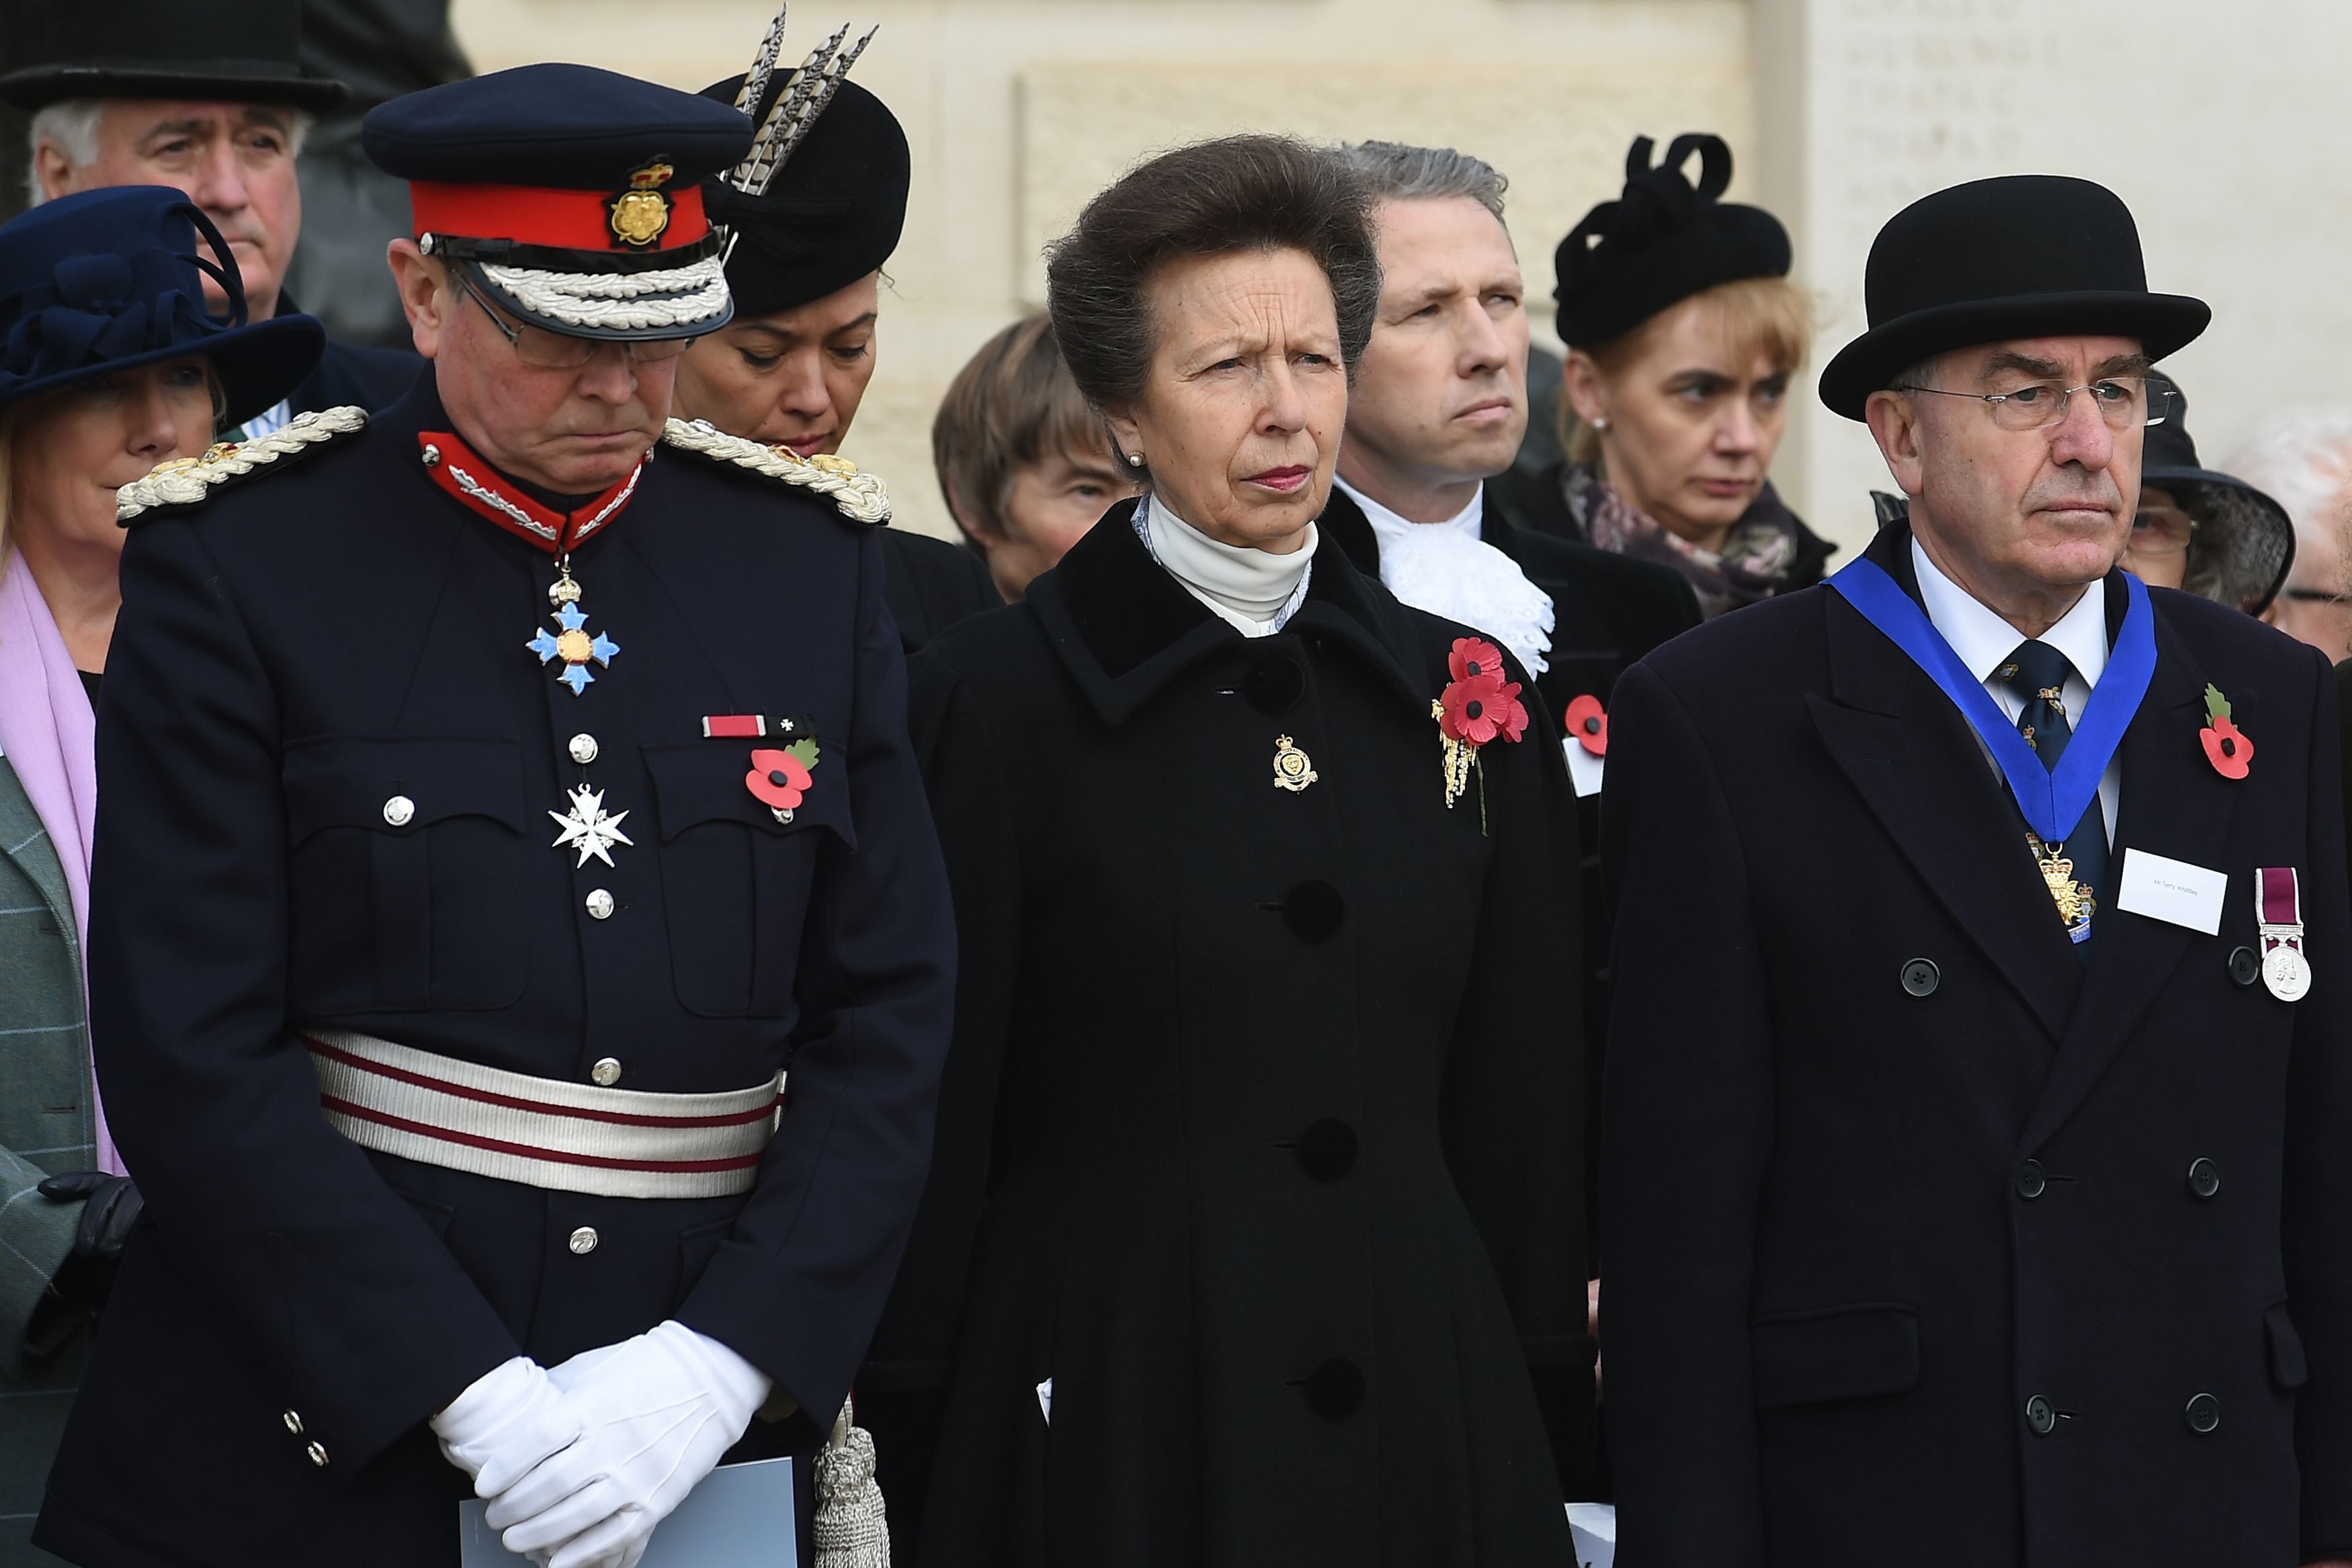 The Princess Royal in 2015 during a service at National Memorial Arboretum to mark Armistice Day, the anniversary of the end of the First World War (Joe Giddens/PA)